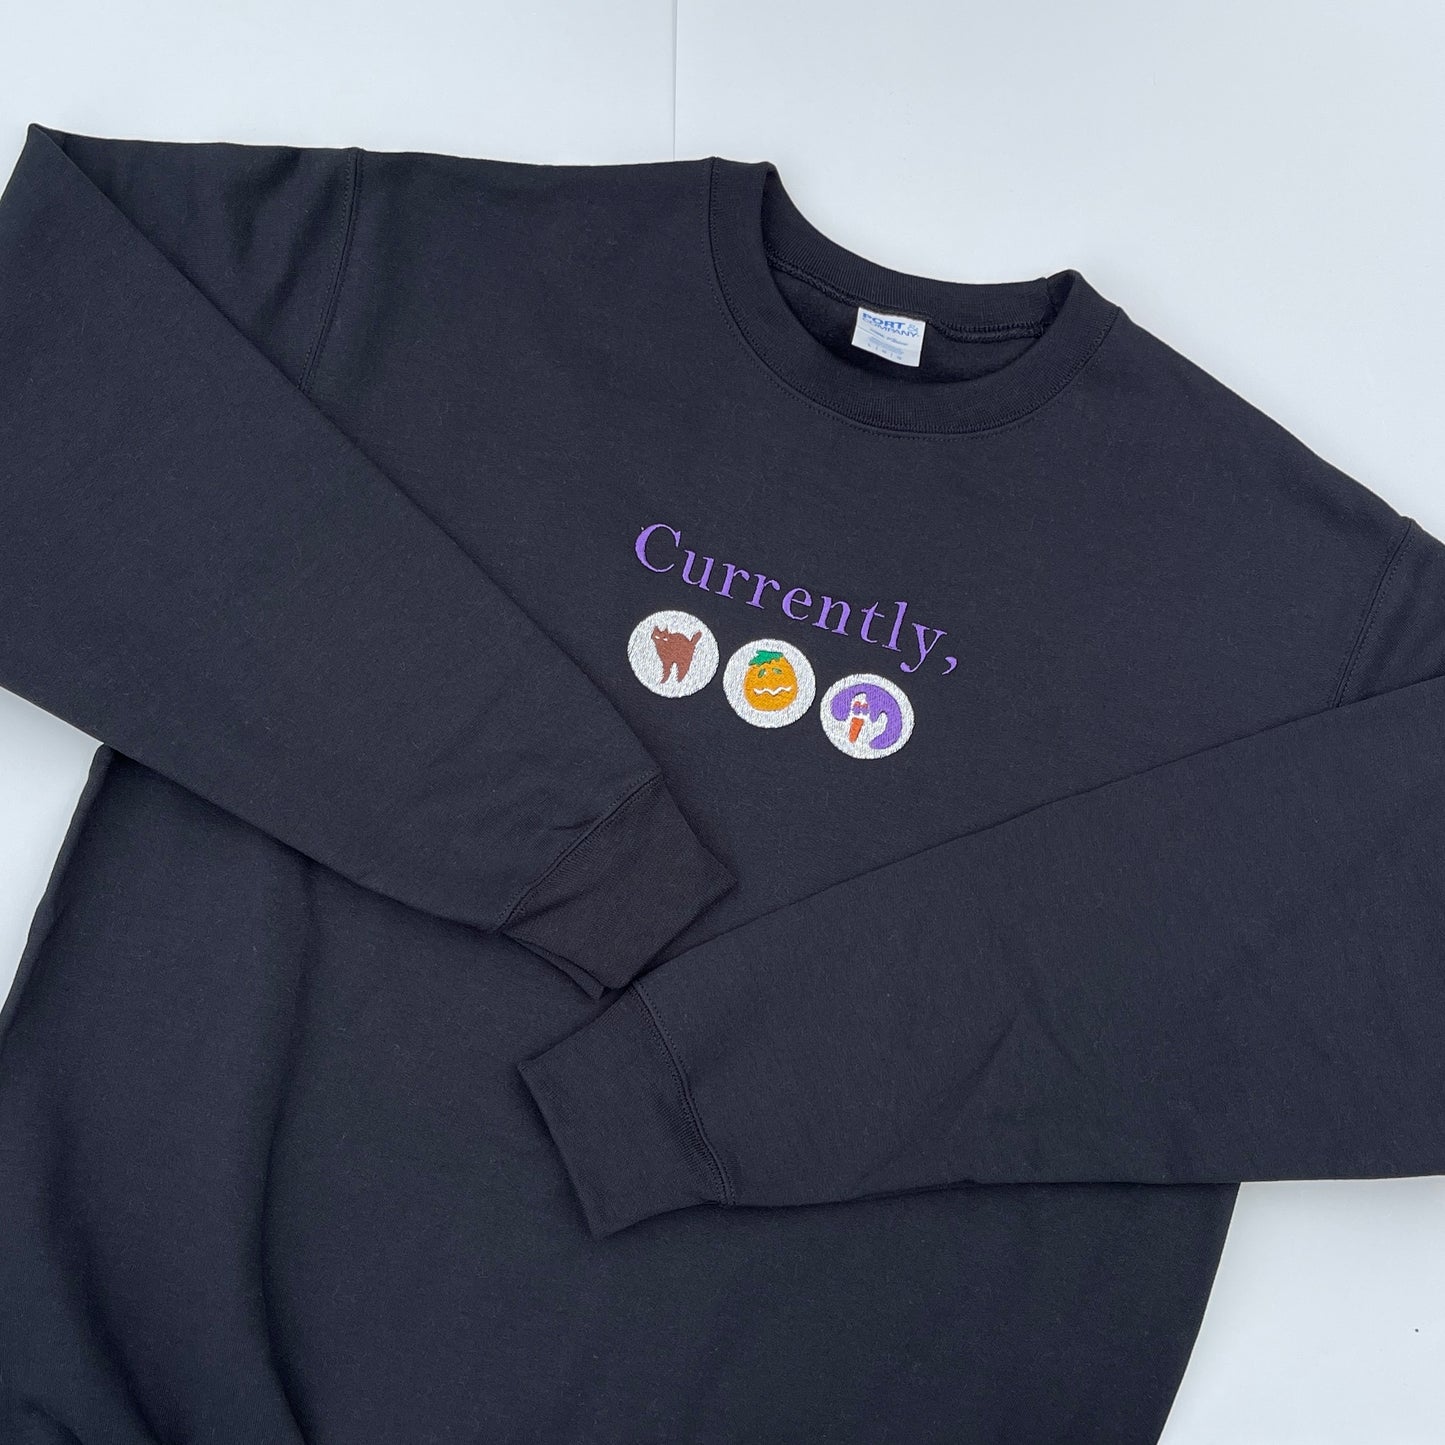 Currently, Fall Cookies Embroidered Sweatshirt